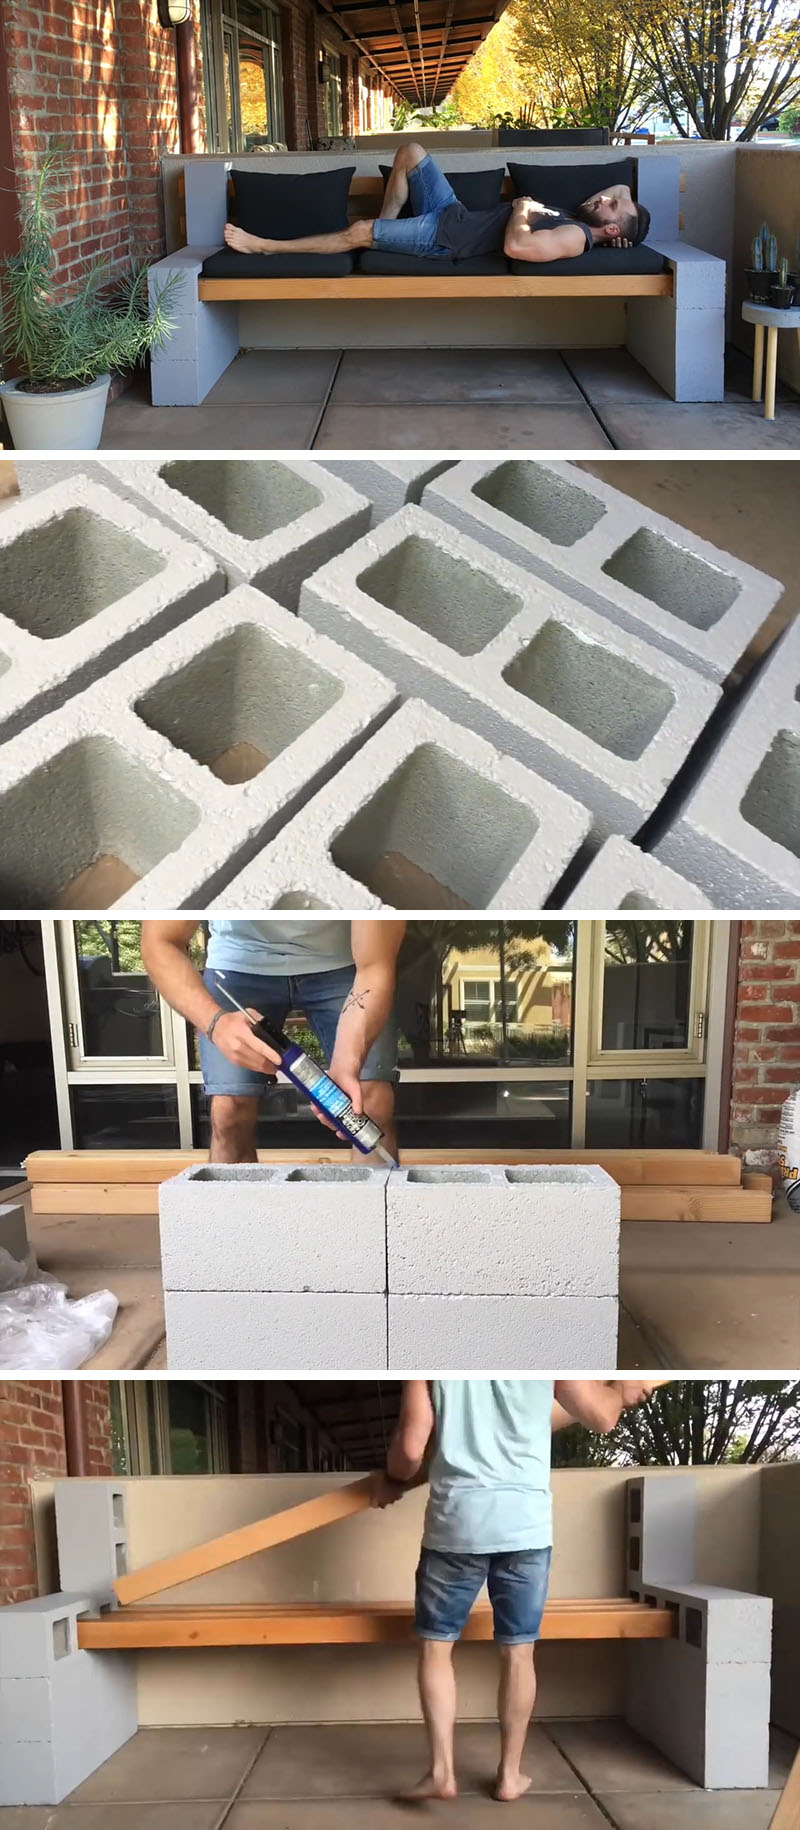 Make Your Own Inexpensive Outdoor Furniture With This DIY Concrete ...